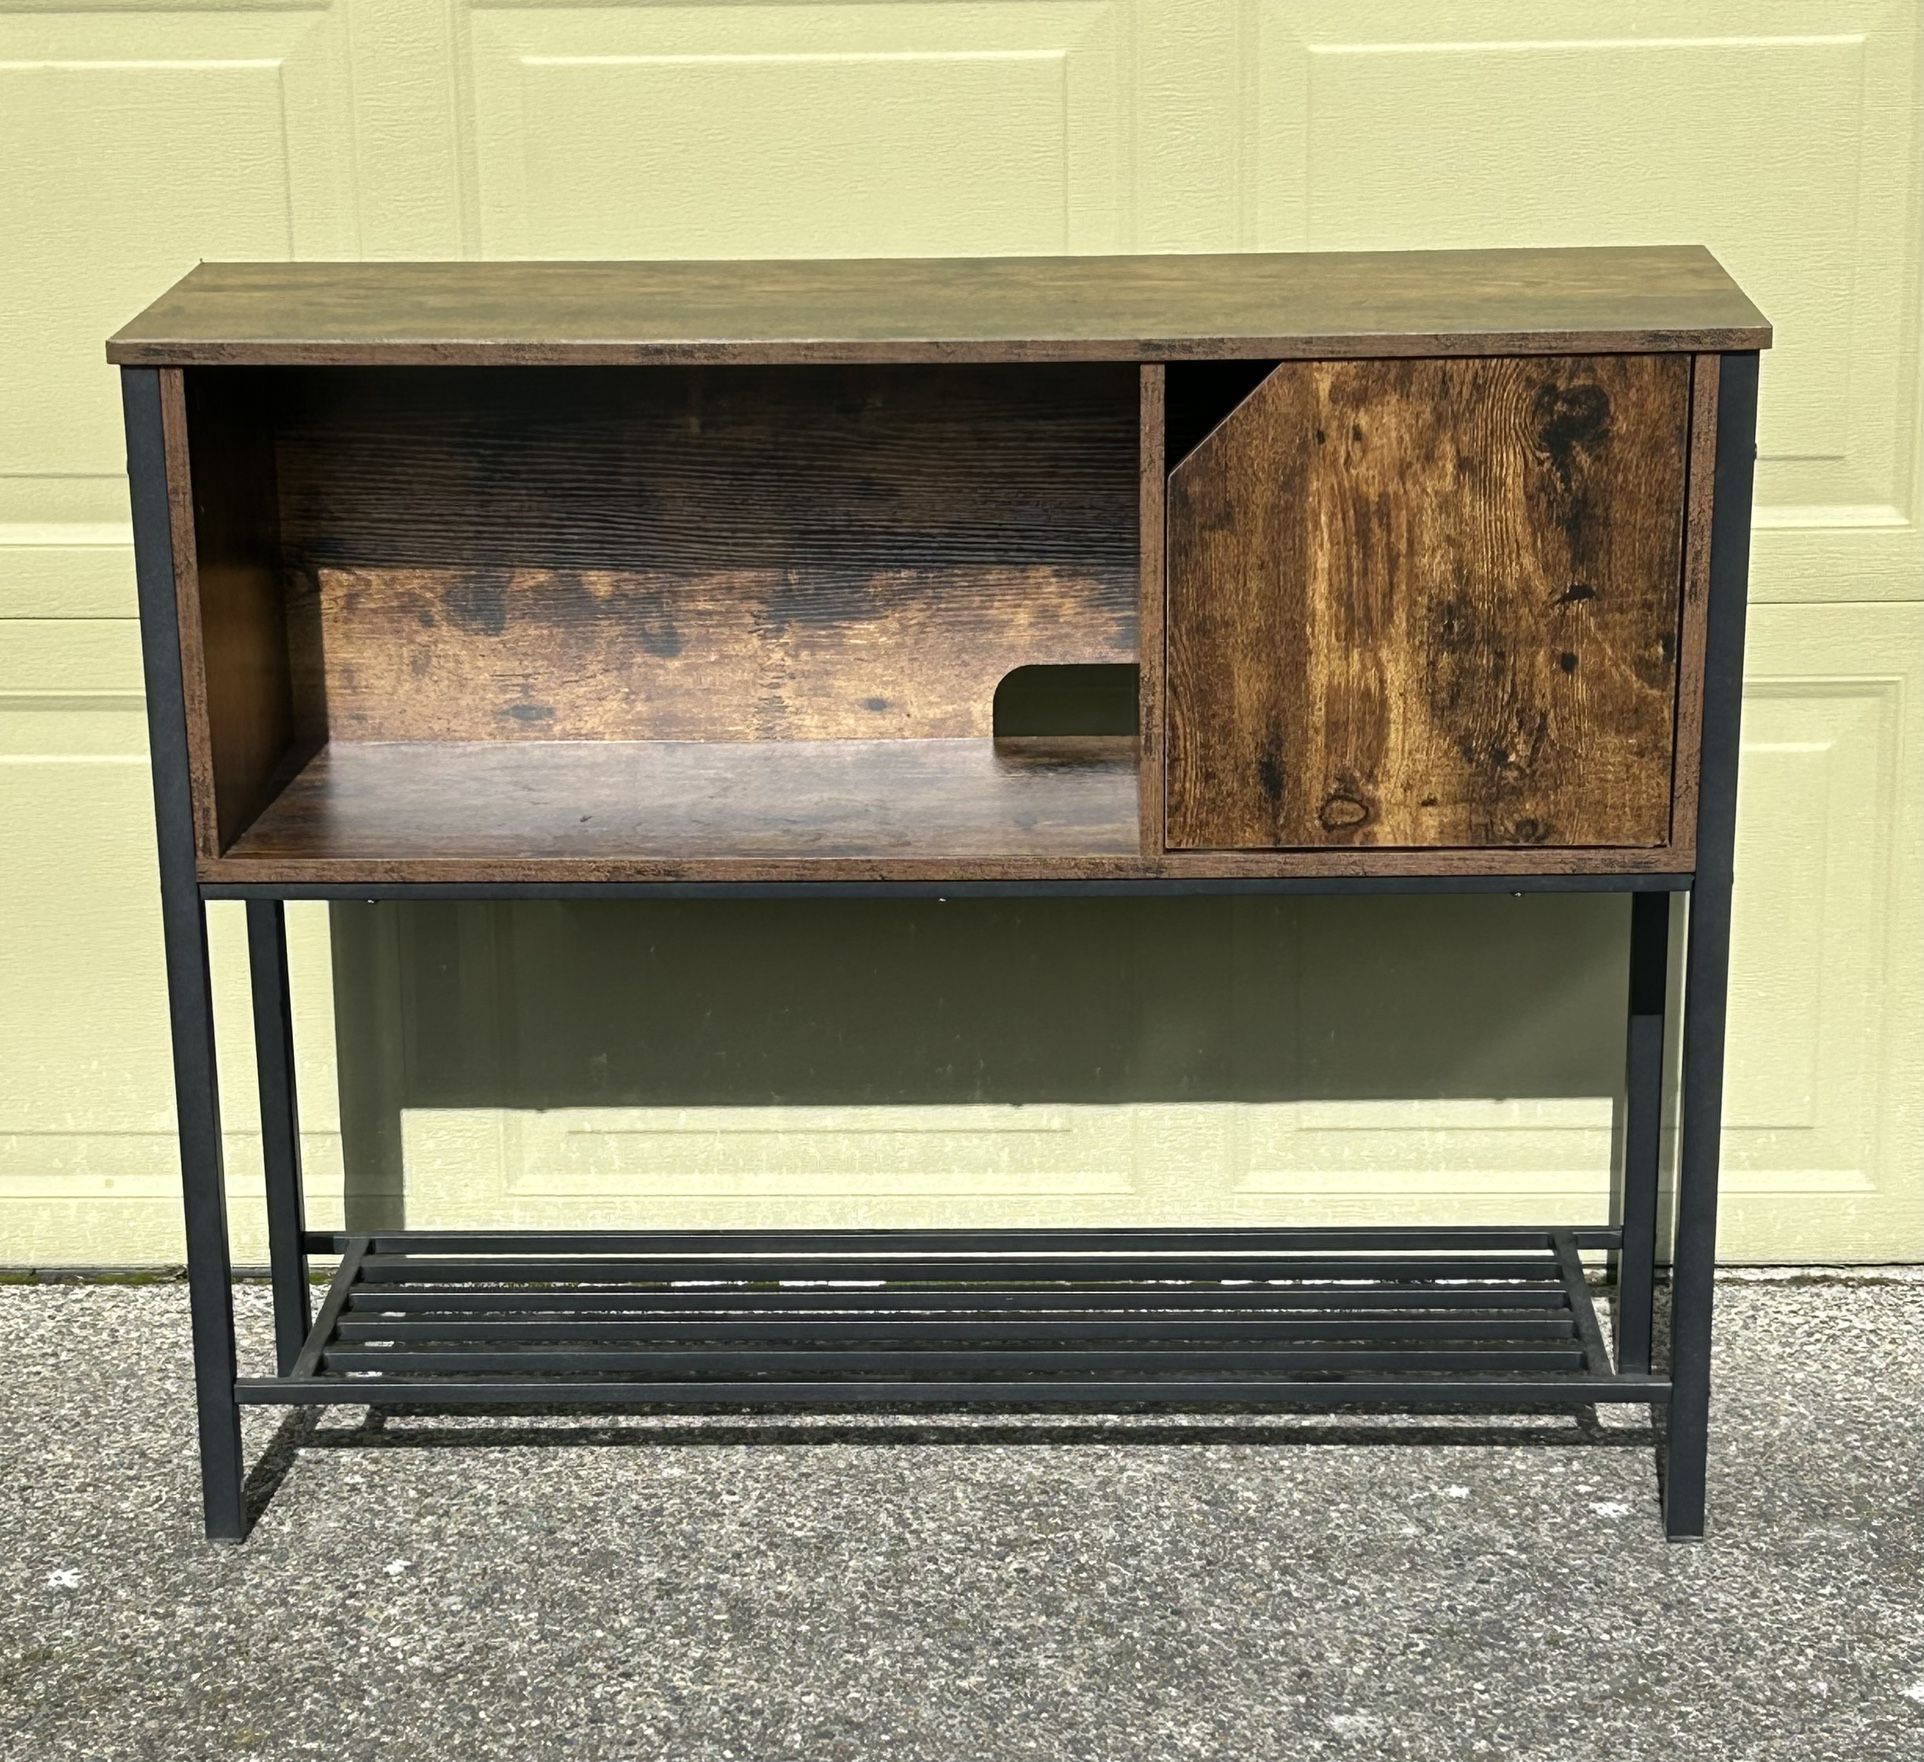 READ THE ADD! GREAT RUSTIC CONSOLE OR TV STAND